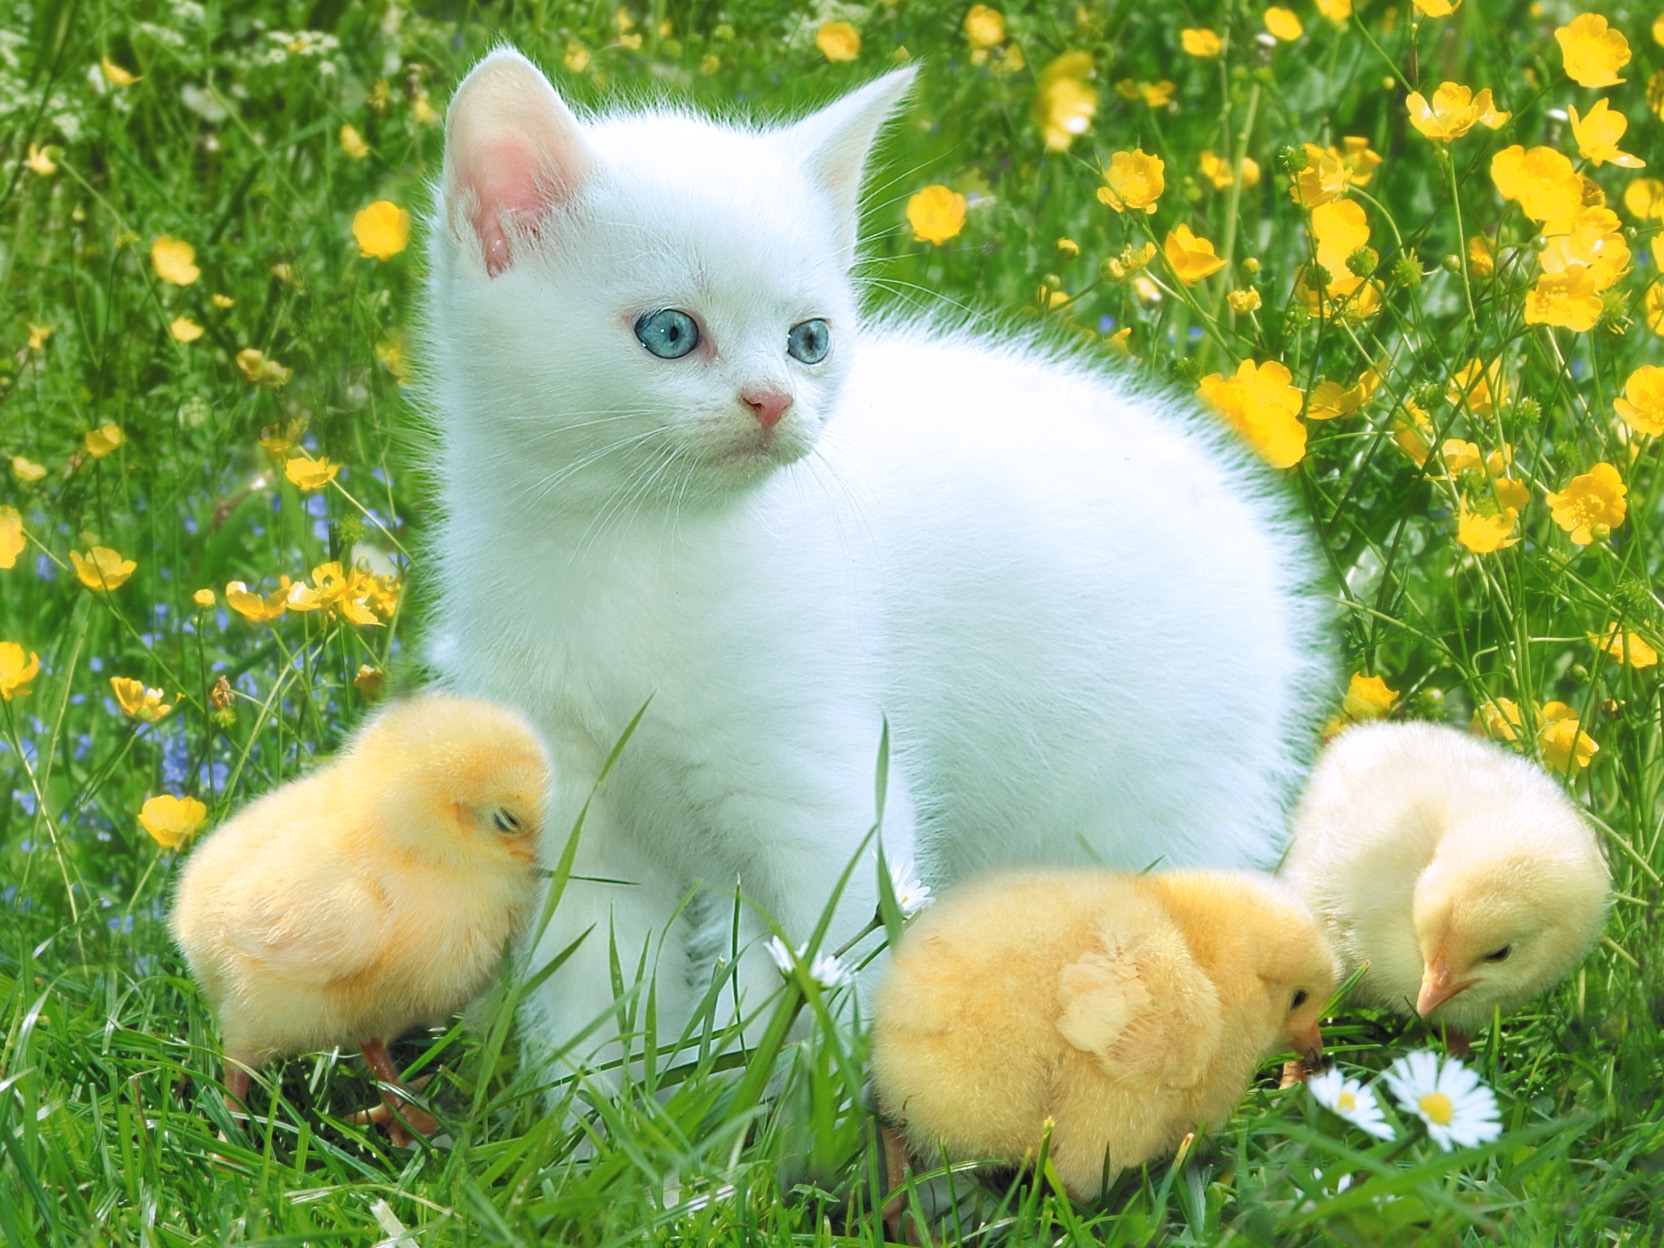 75539 3840x2160 PC pictures for free, download animals, playful, kitty, grass 3840x2160 wallpapers on your desktop